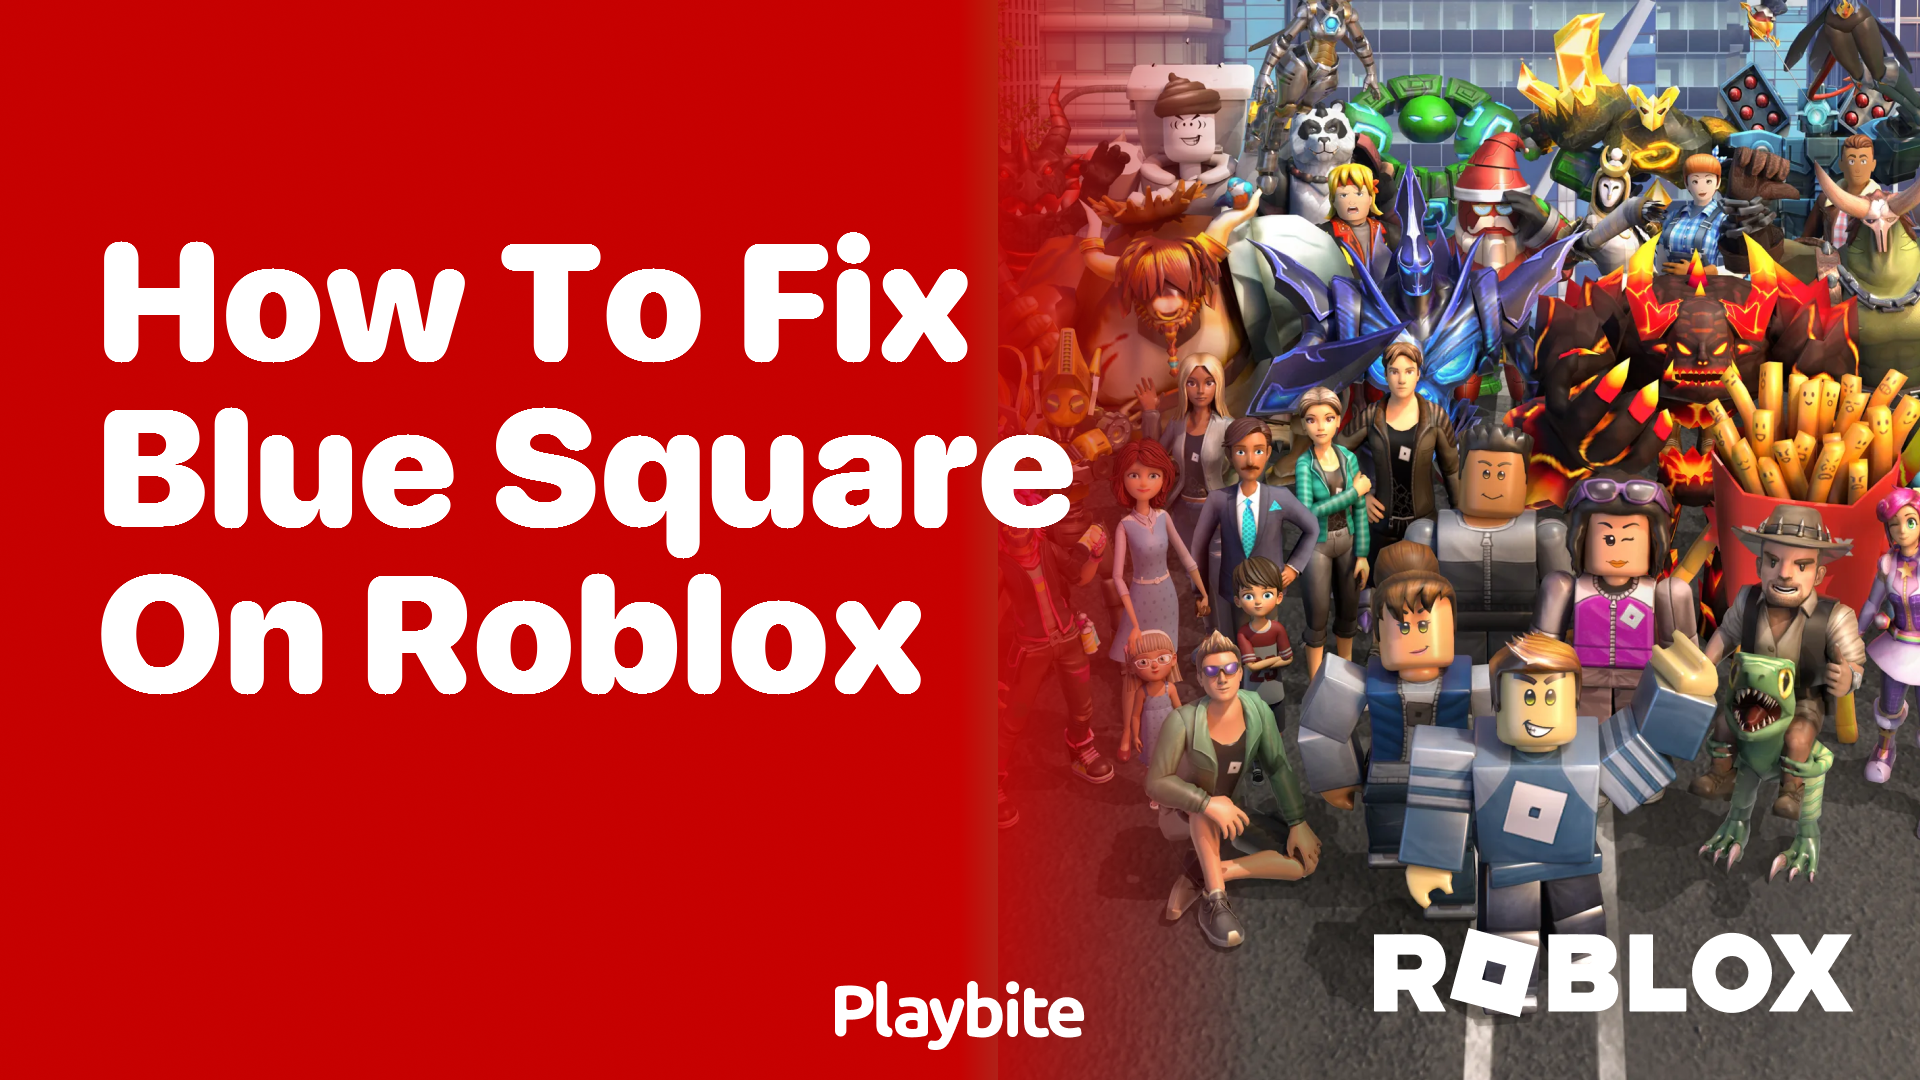 How to Fix the Blue Square on Roblox